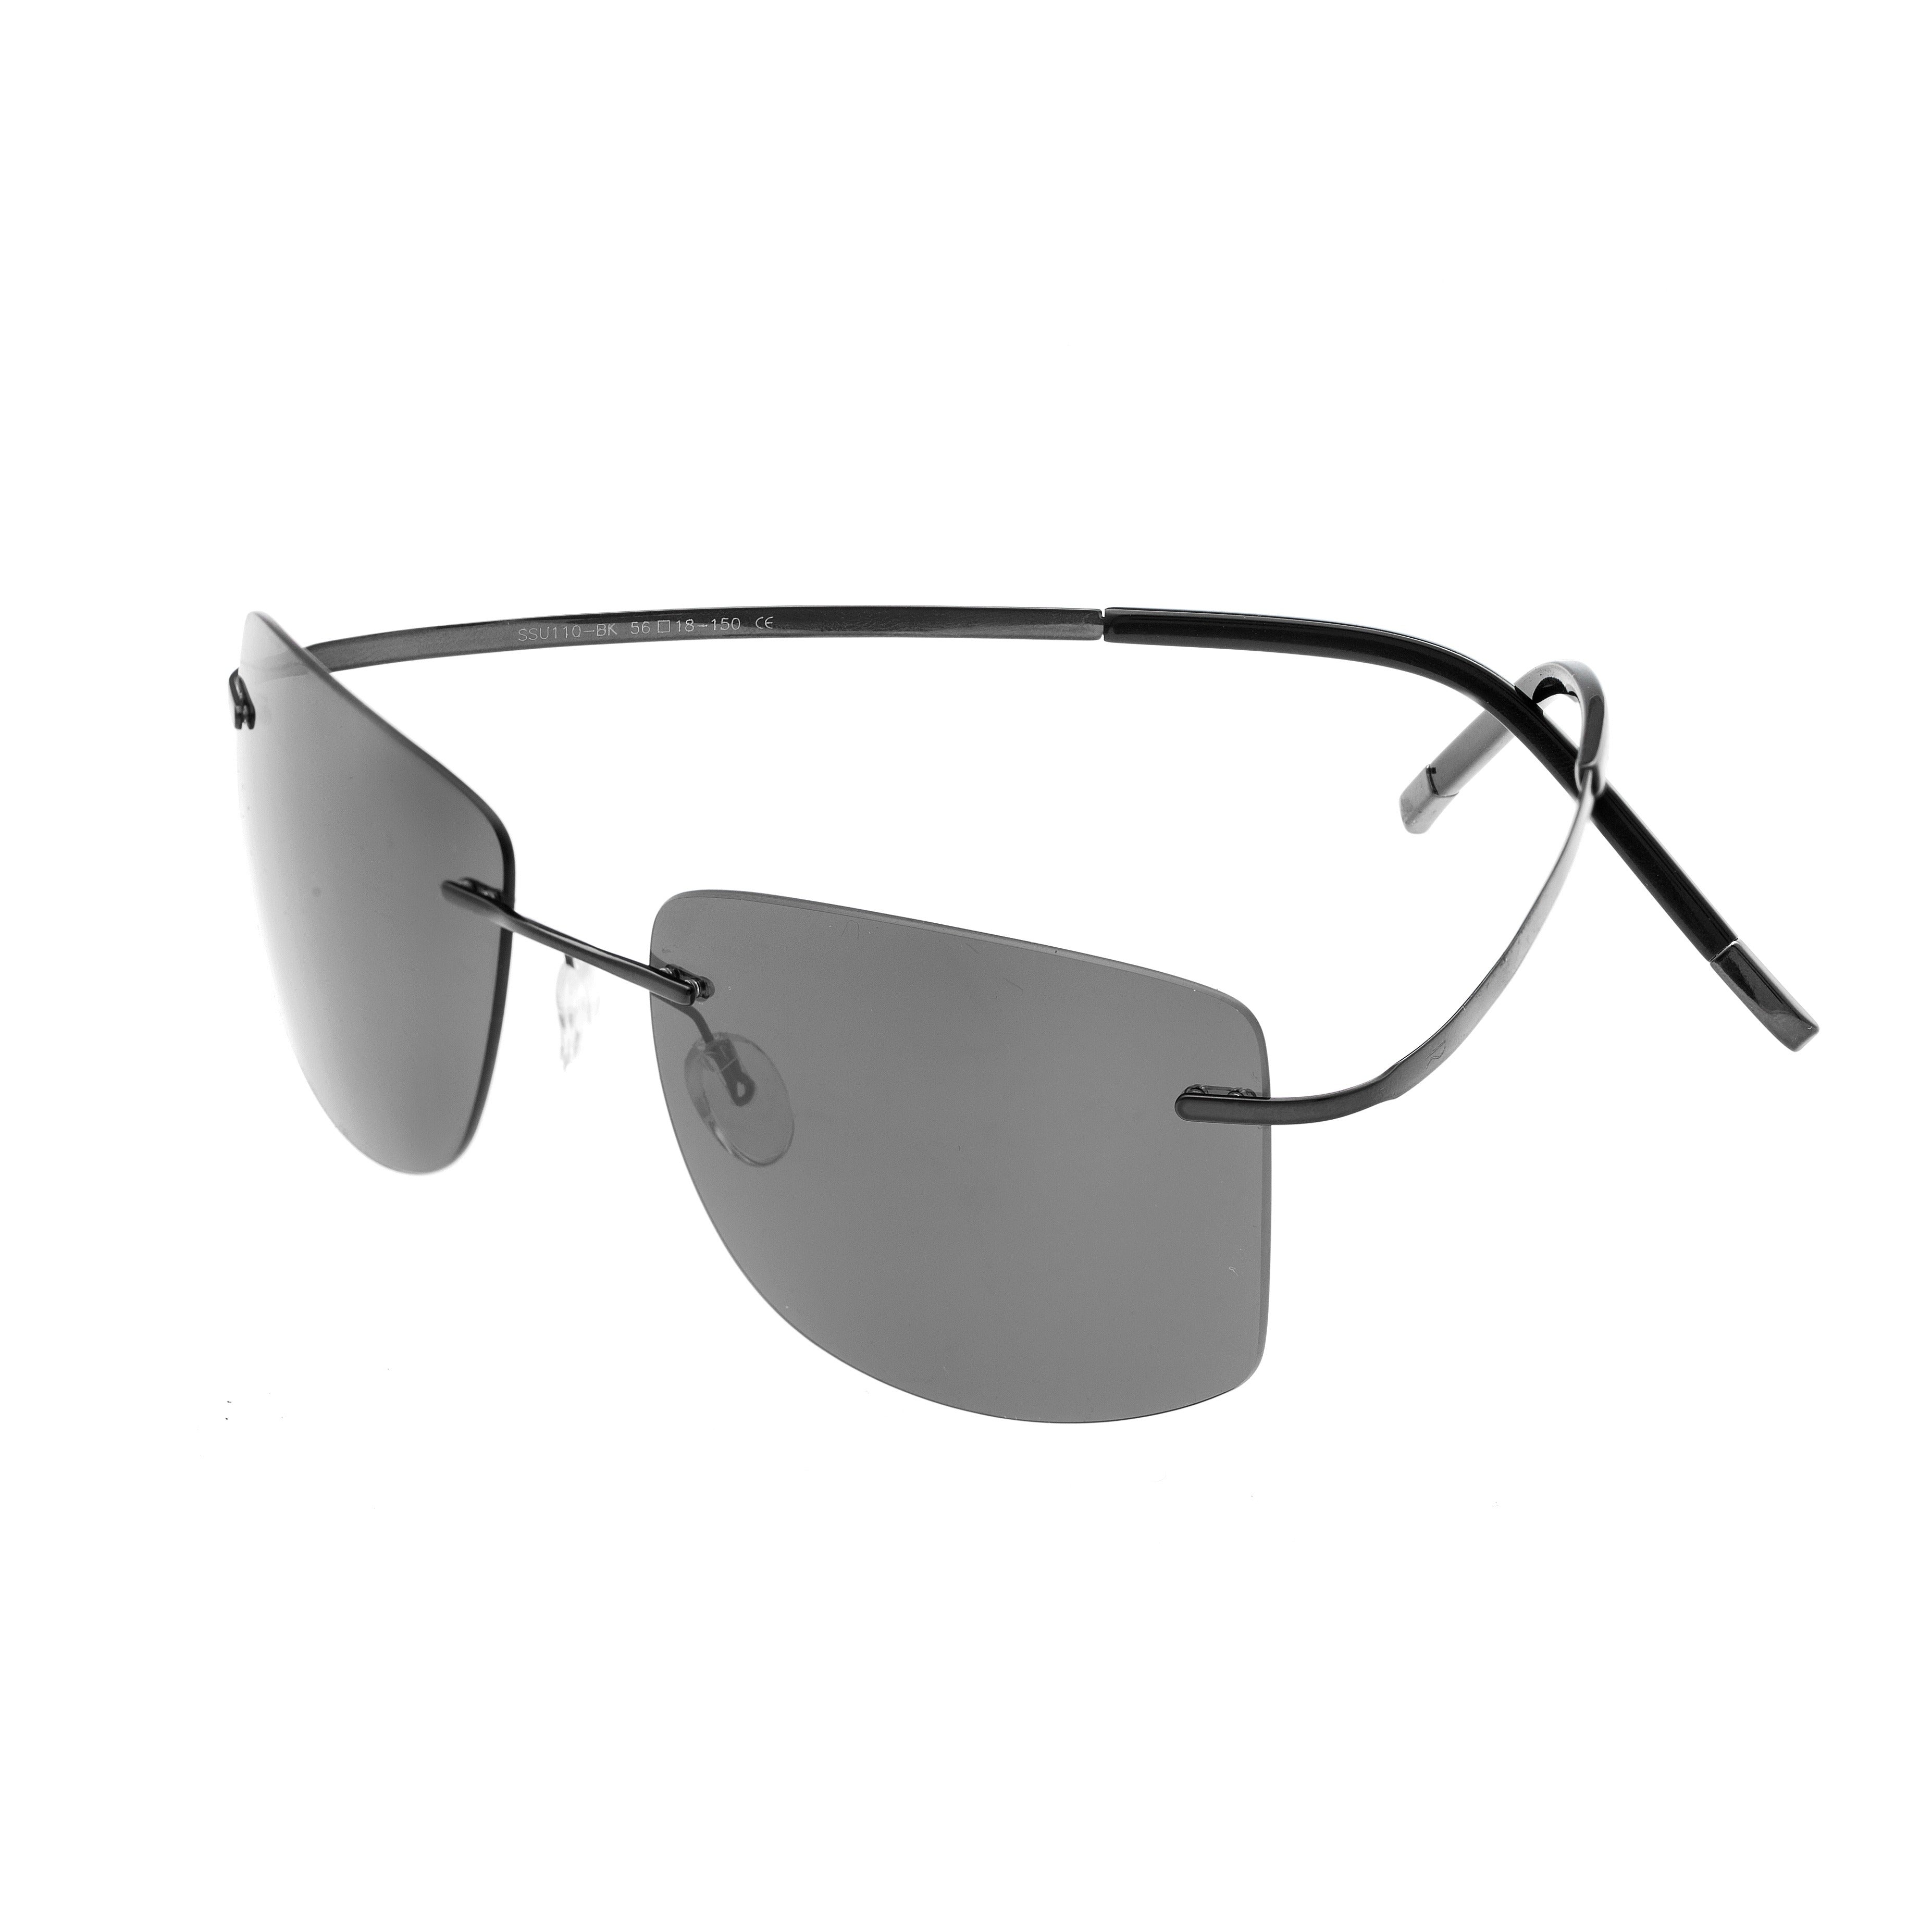 NS2007BRFBRL Stainless Steel Brown Frame with Brown Glass Lens Sunglas